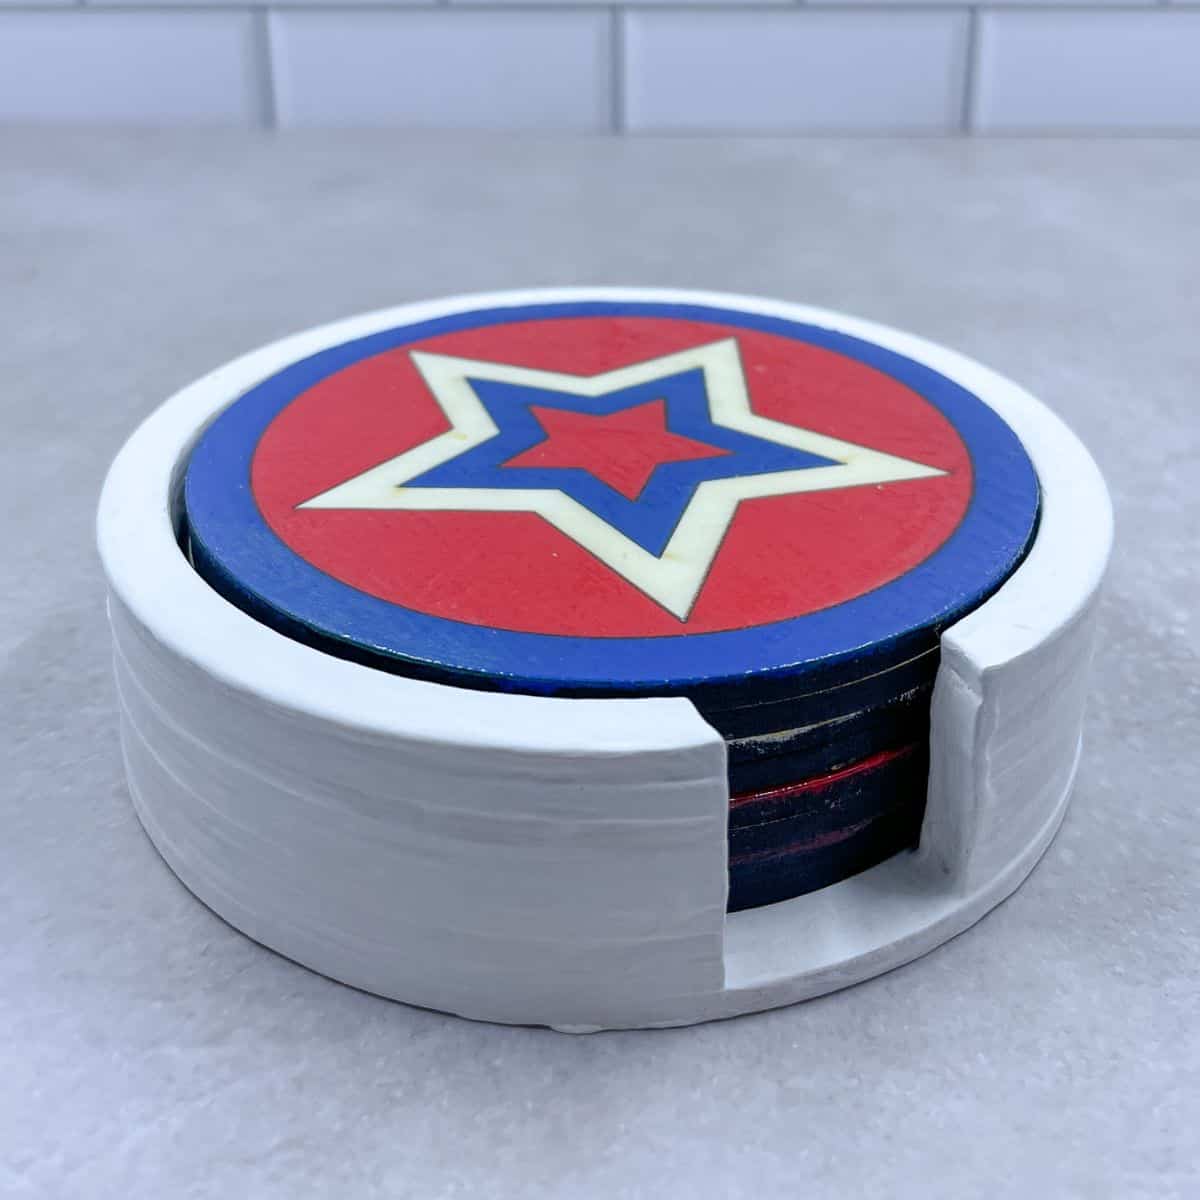 Set of red, white, and blue star laser coasters.